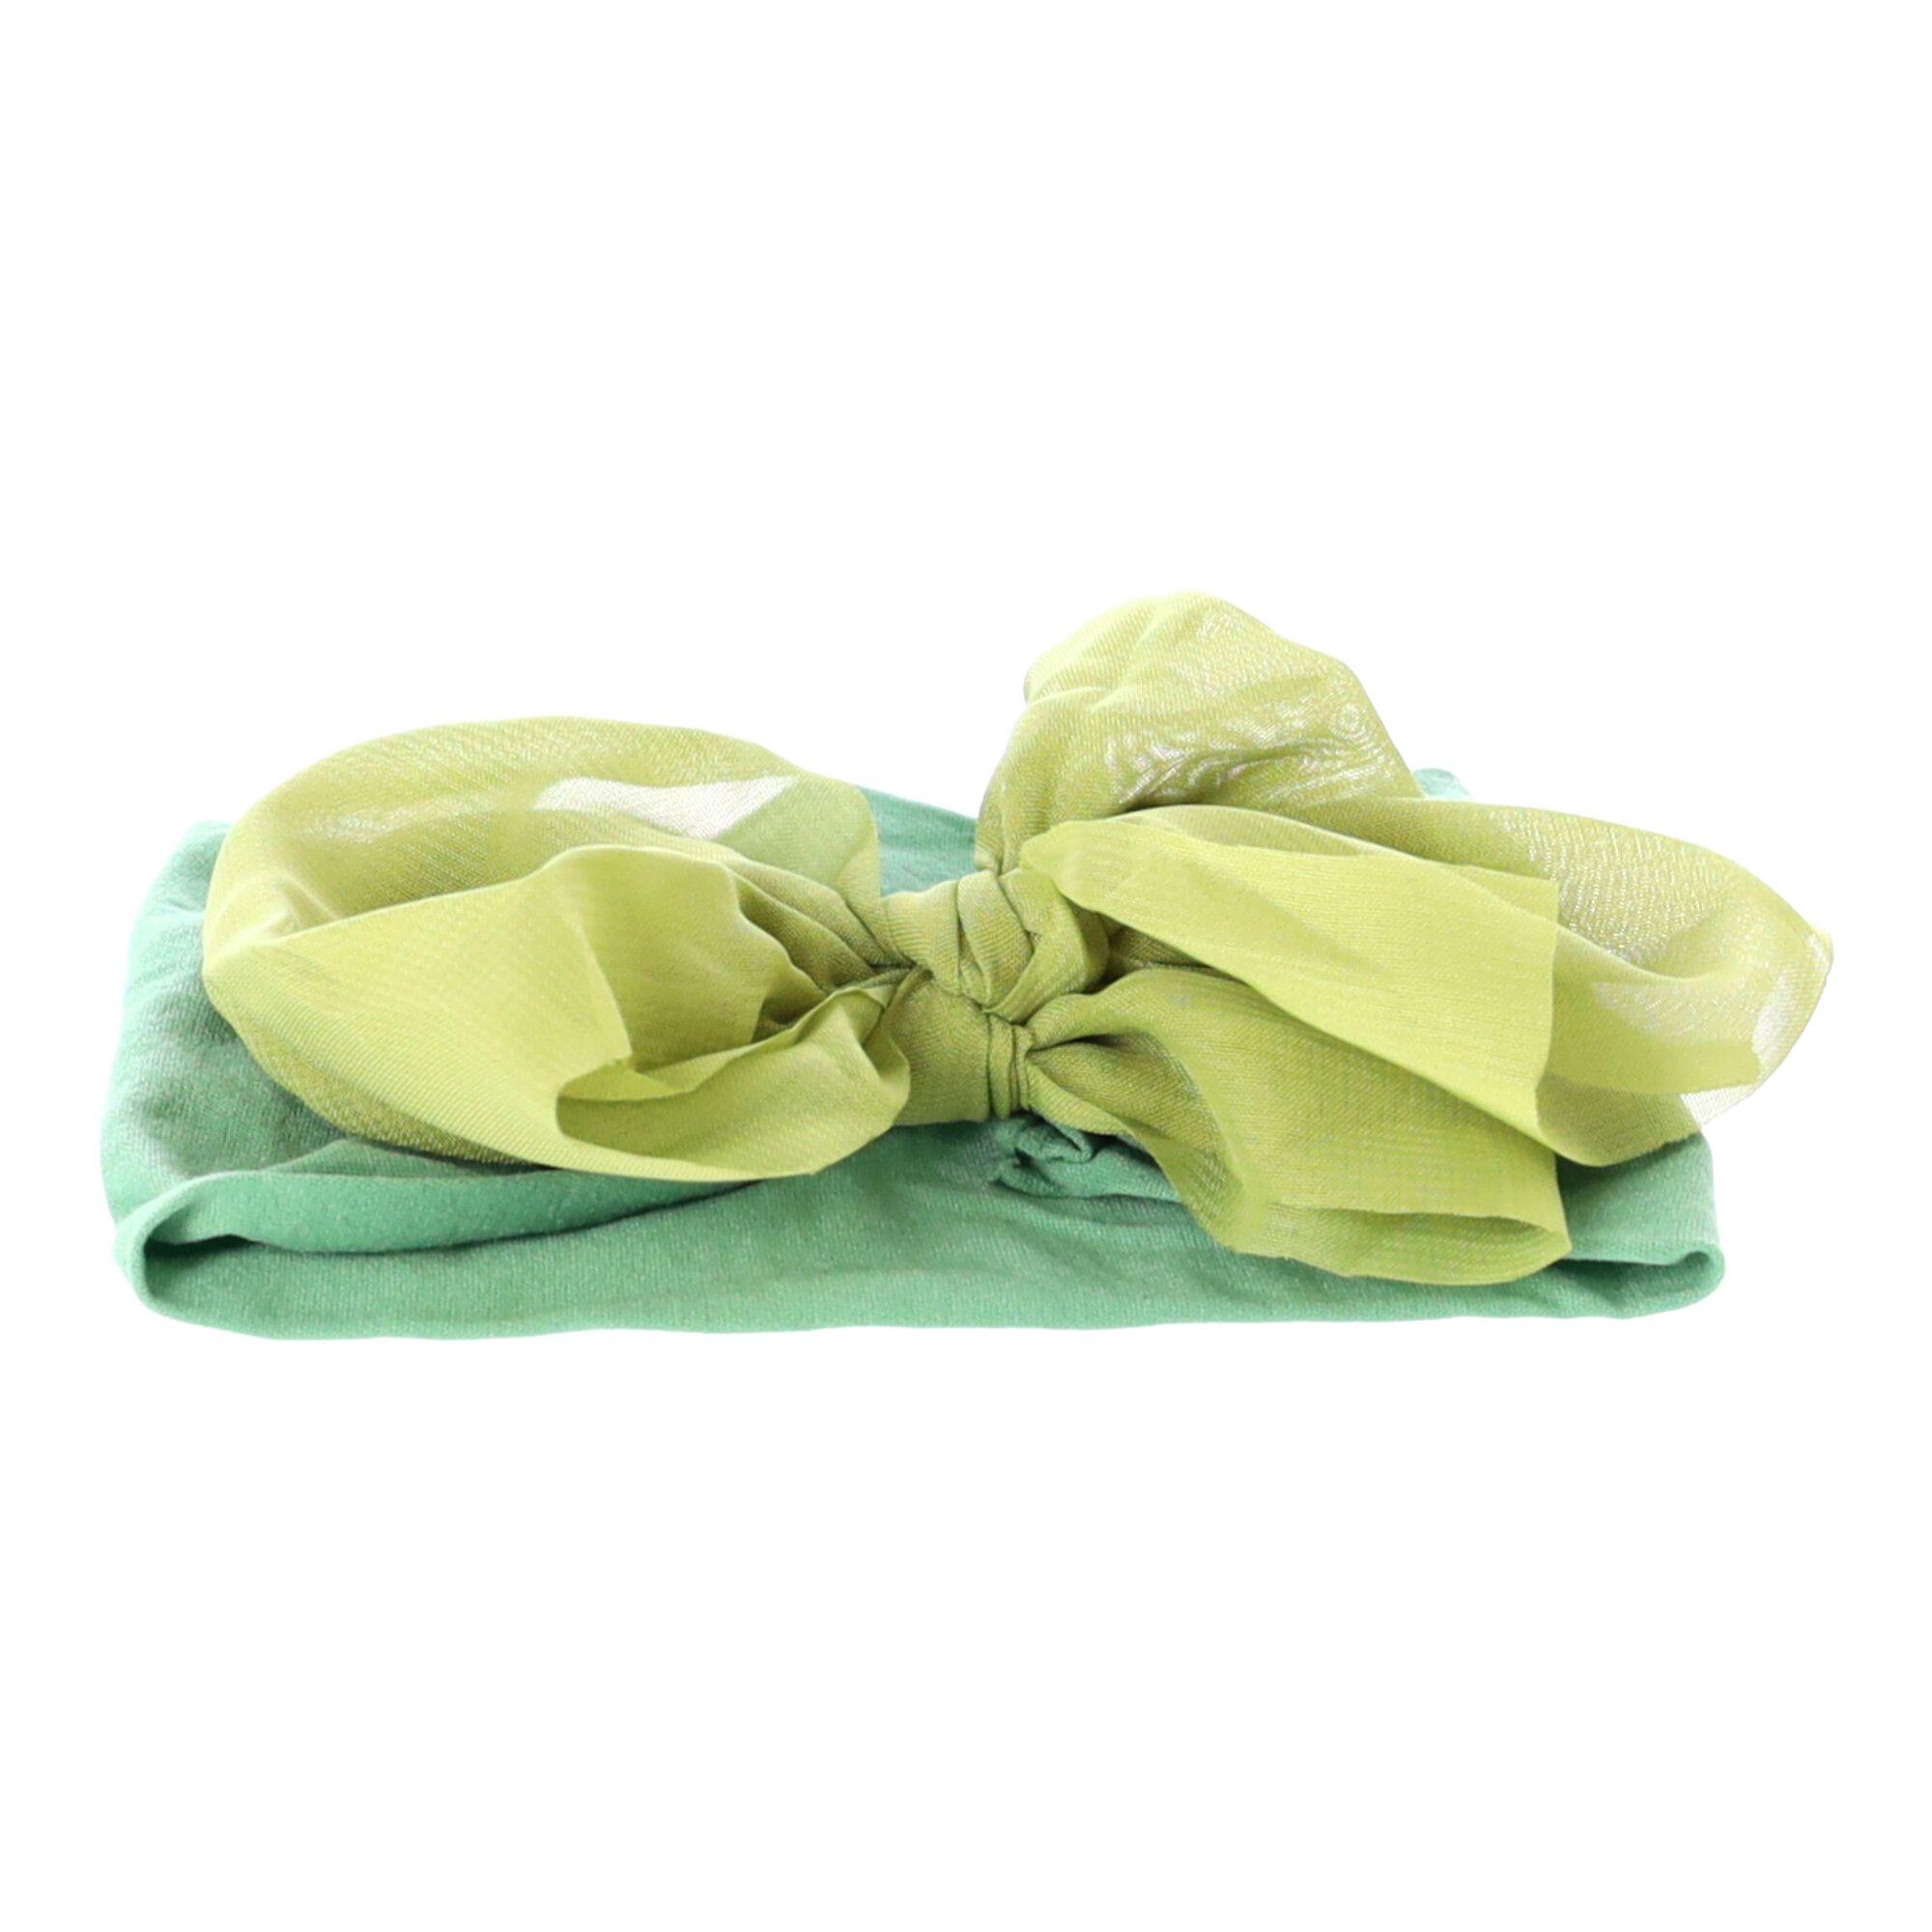 Baby headband with a bow - green, wide